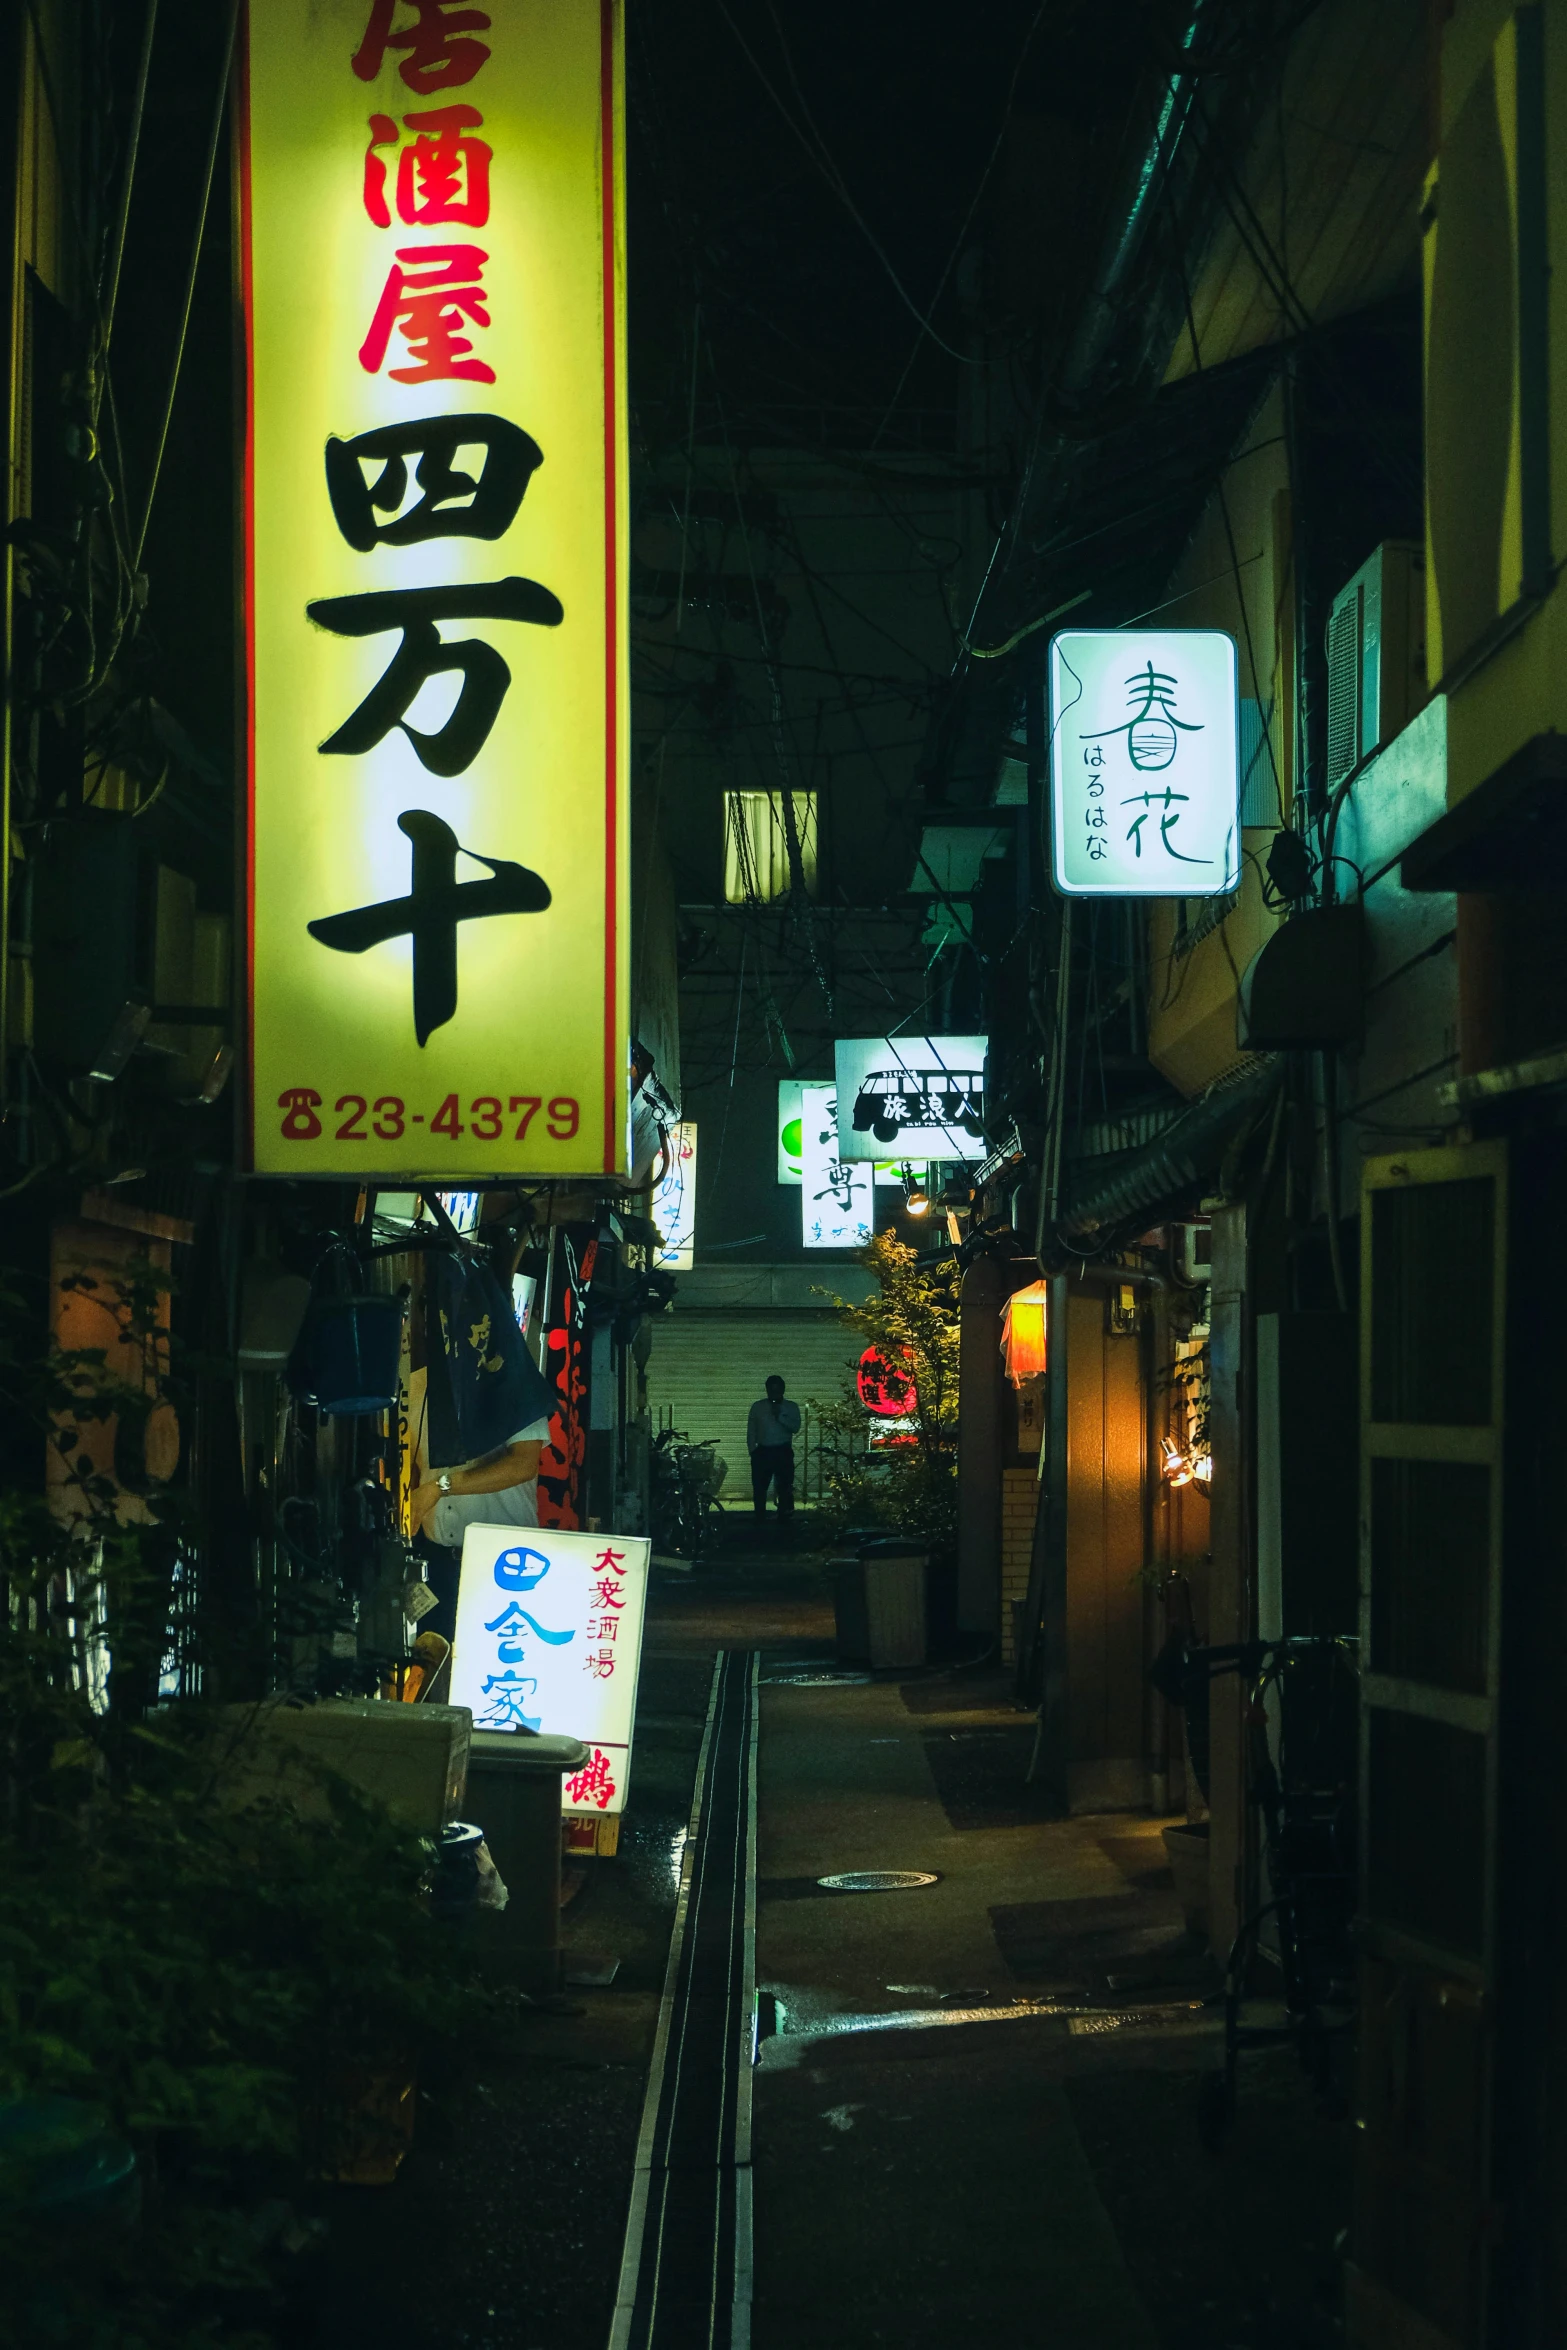 a narrow alley way in a city during the night